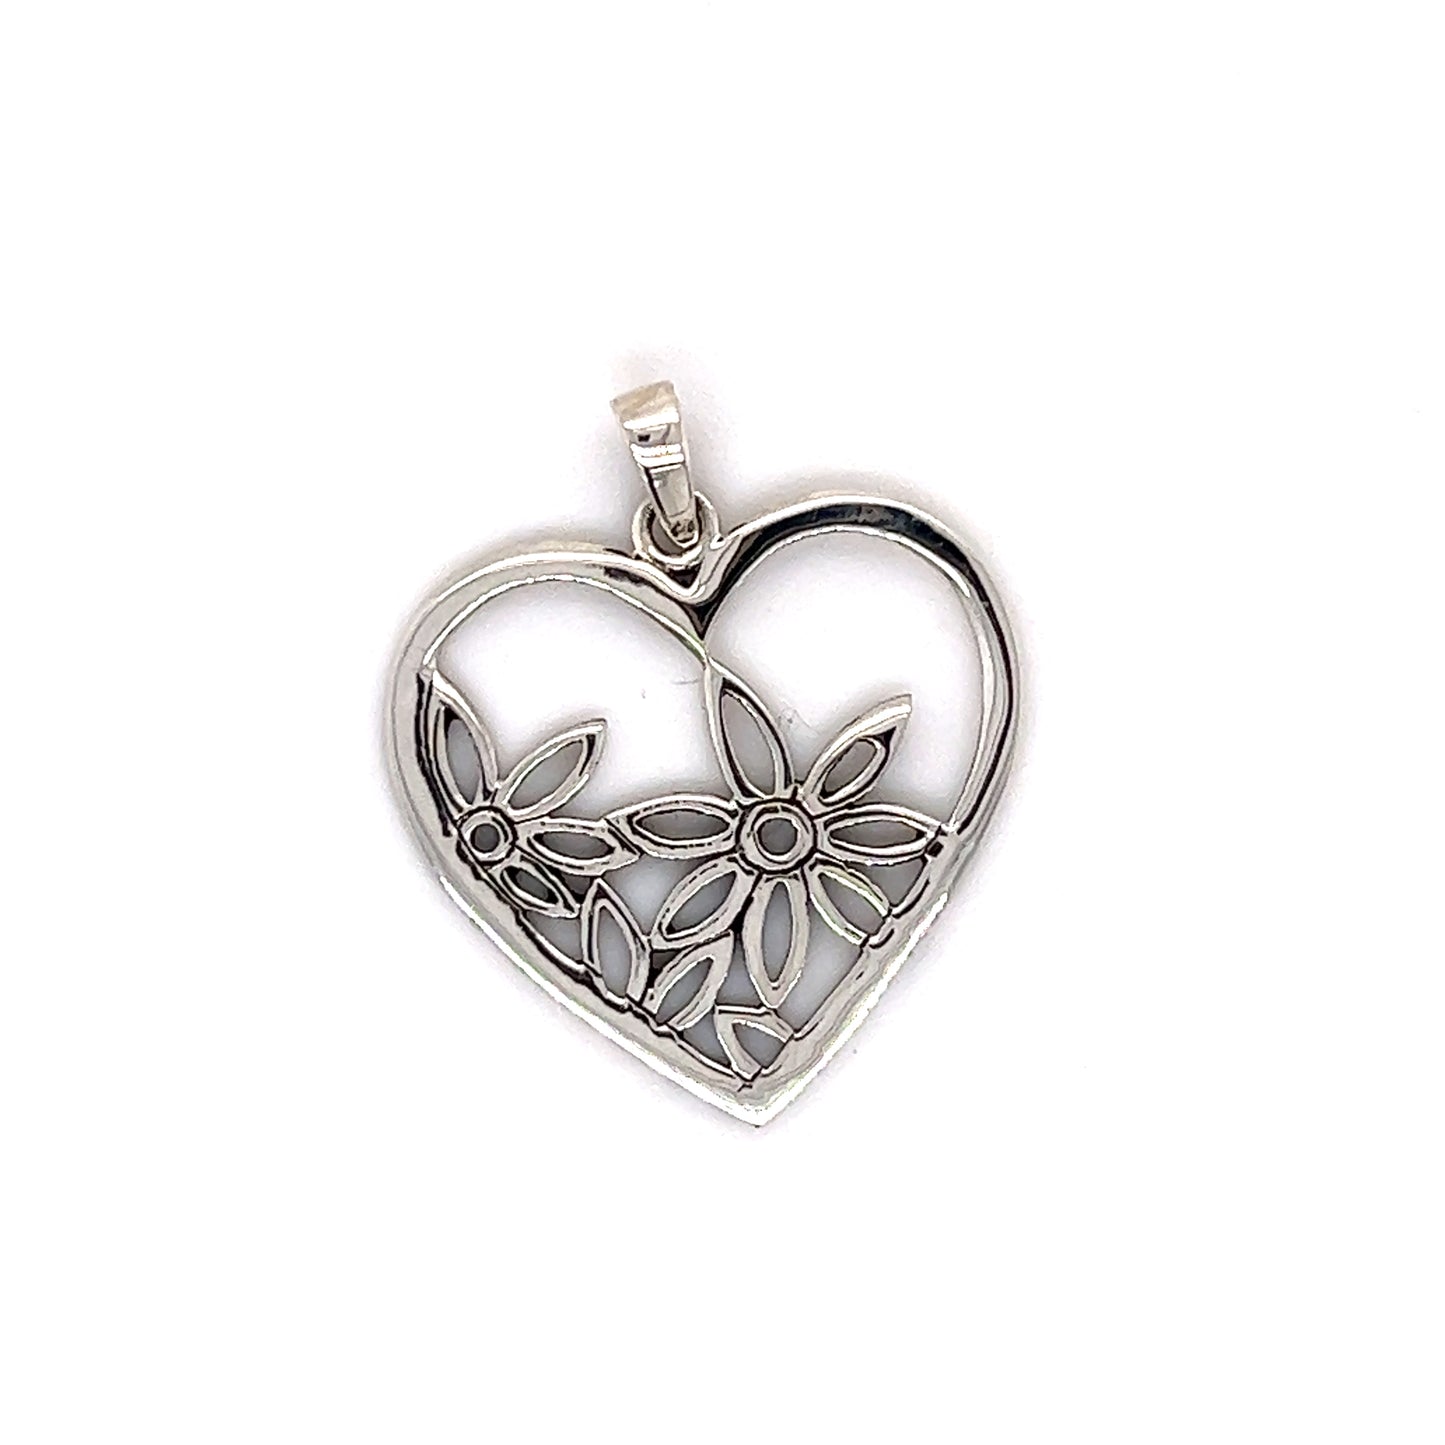 A Super Silver heart pendant with exquisite flower detailing, inspired by the beauty of nature.